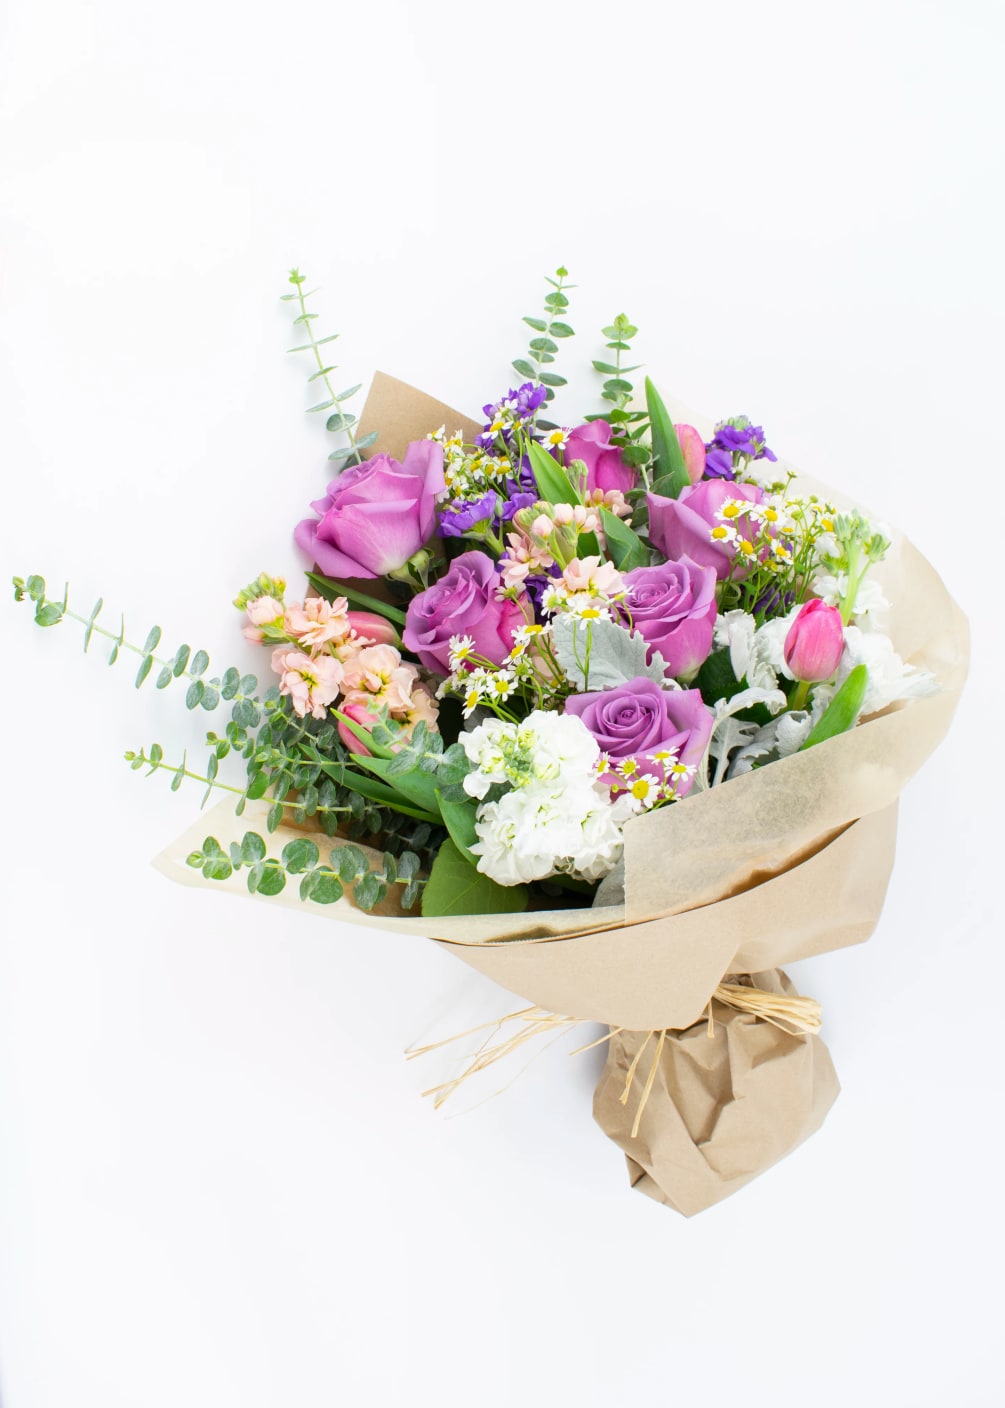  PRETTY PASTEL BOUQUET WITH LAVENDER ROSES

Pretty and perfumed. This gorgeous pastel